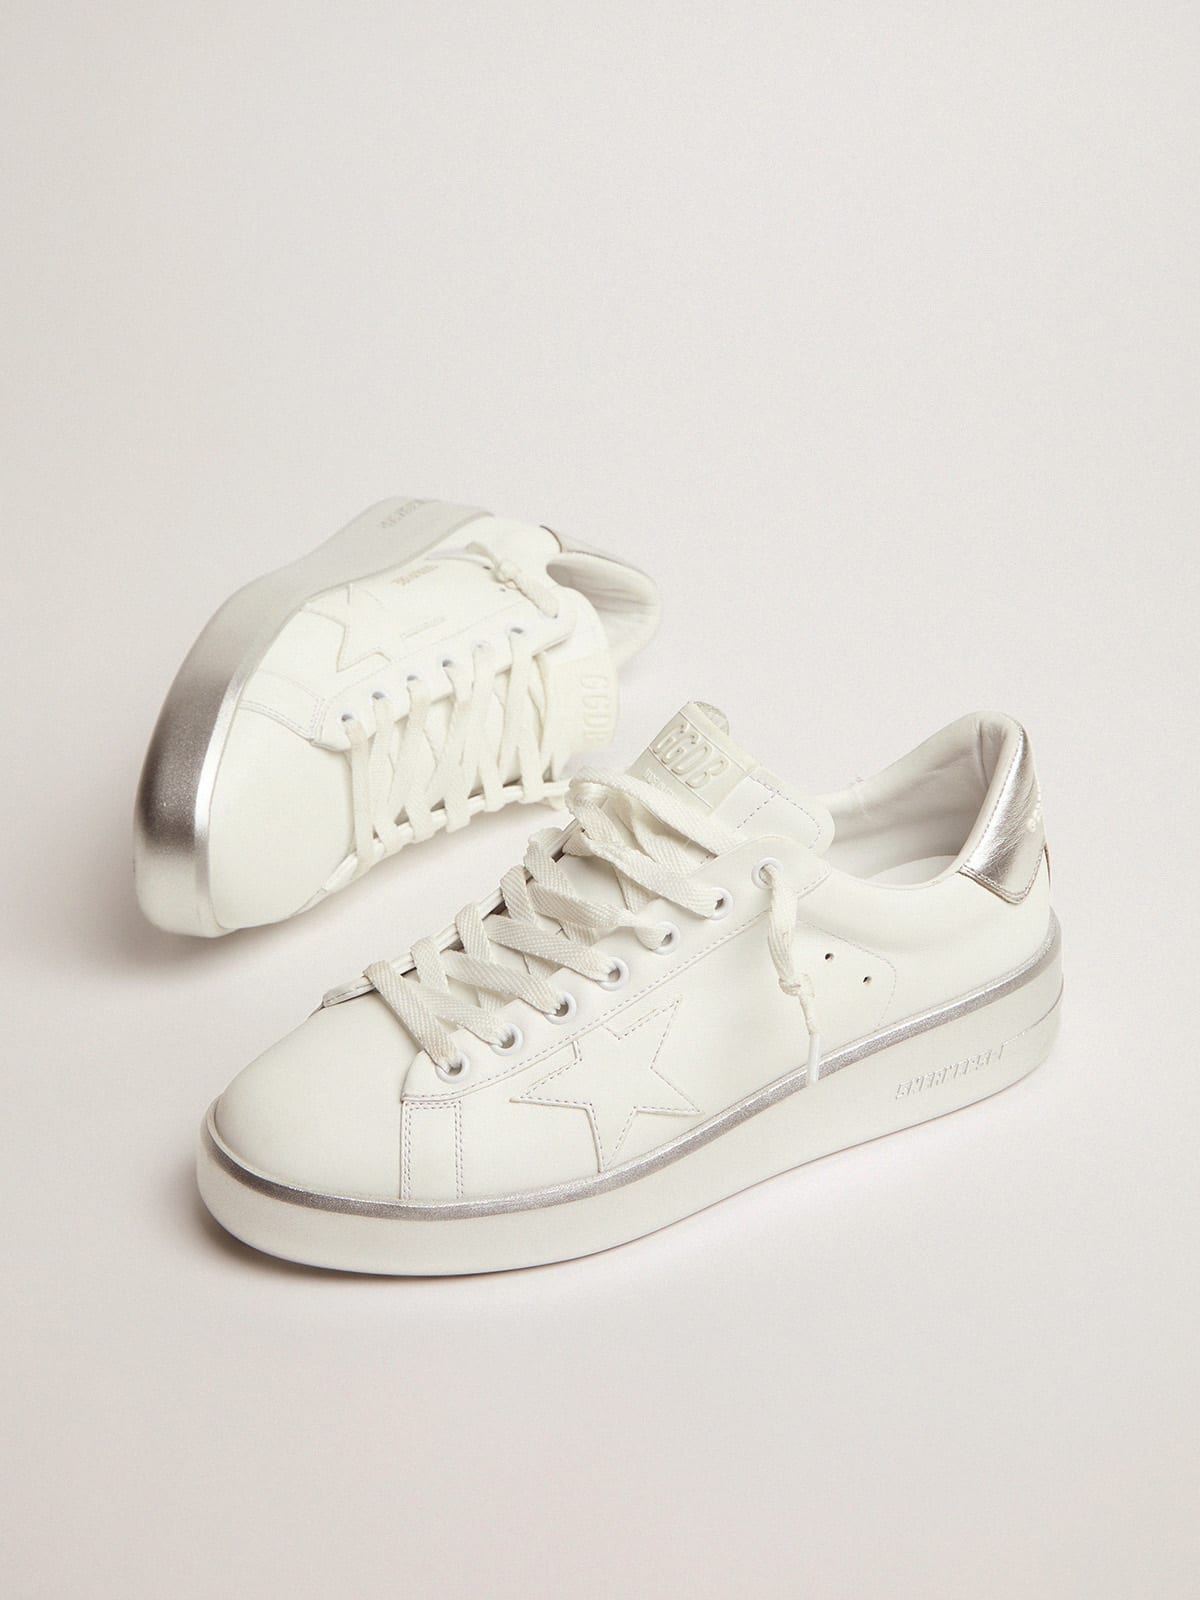 Golden Goose - Purestar sneakers in leather with silver laminated heel tab and foxing in 